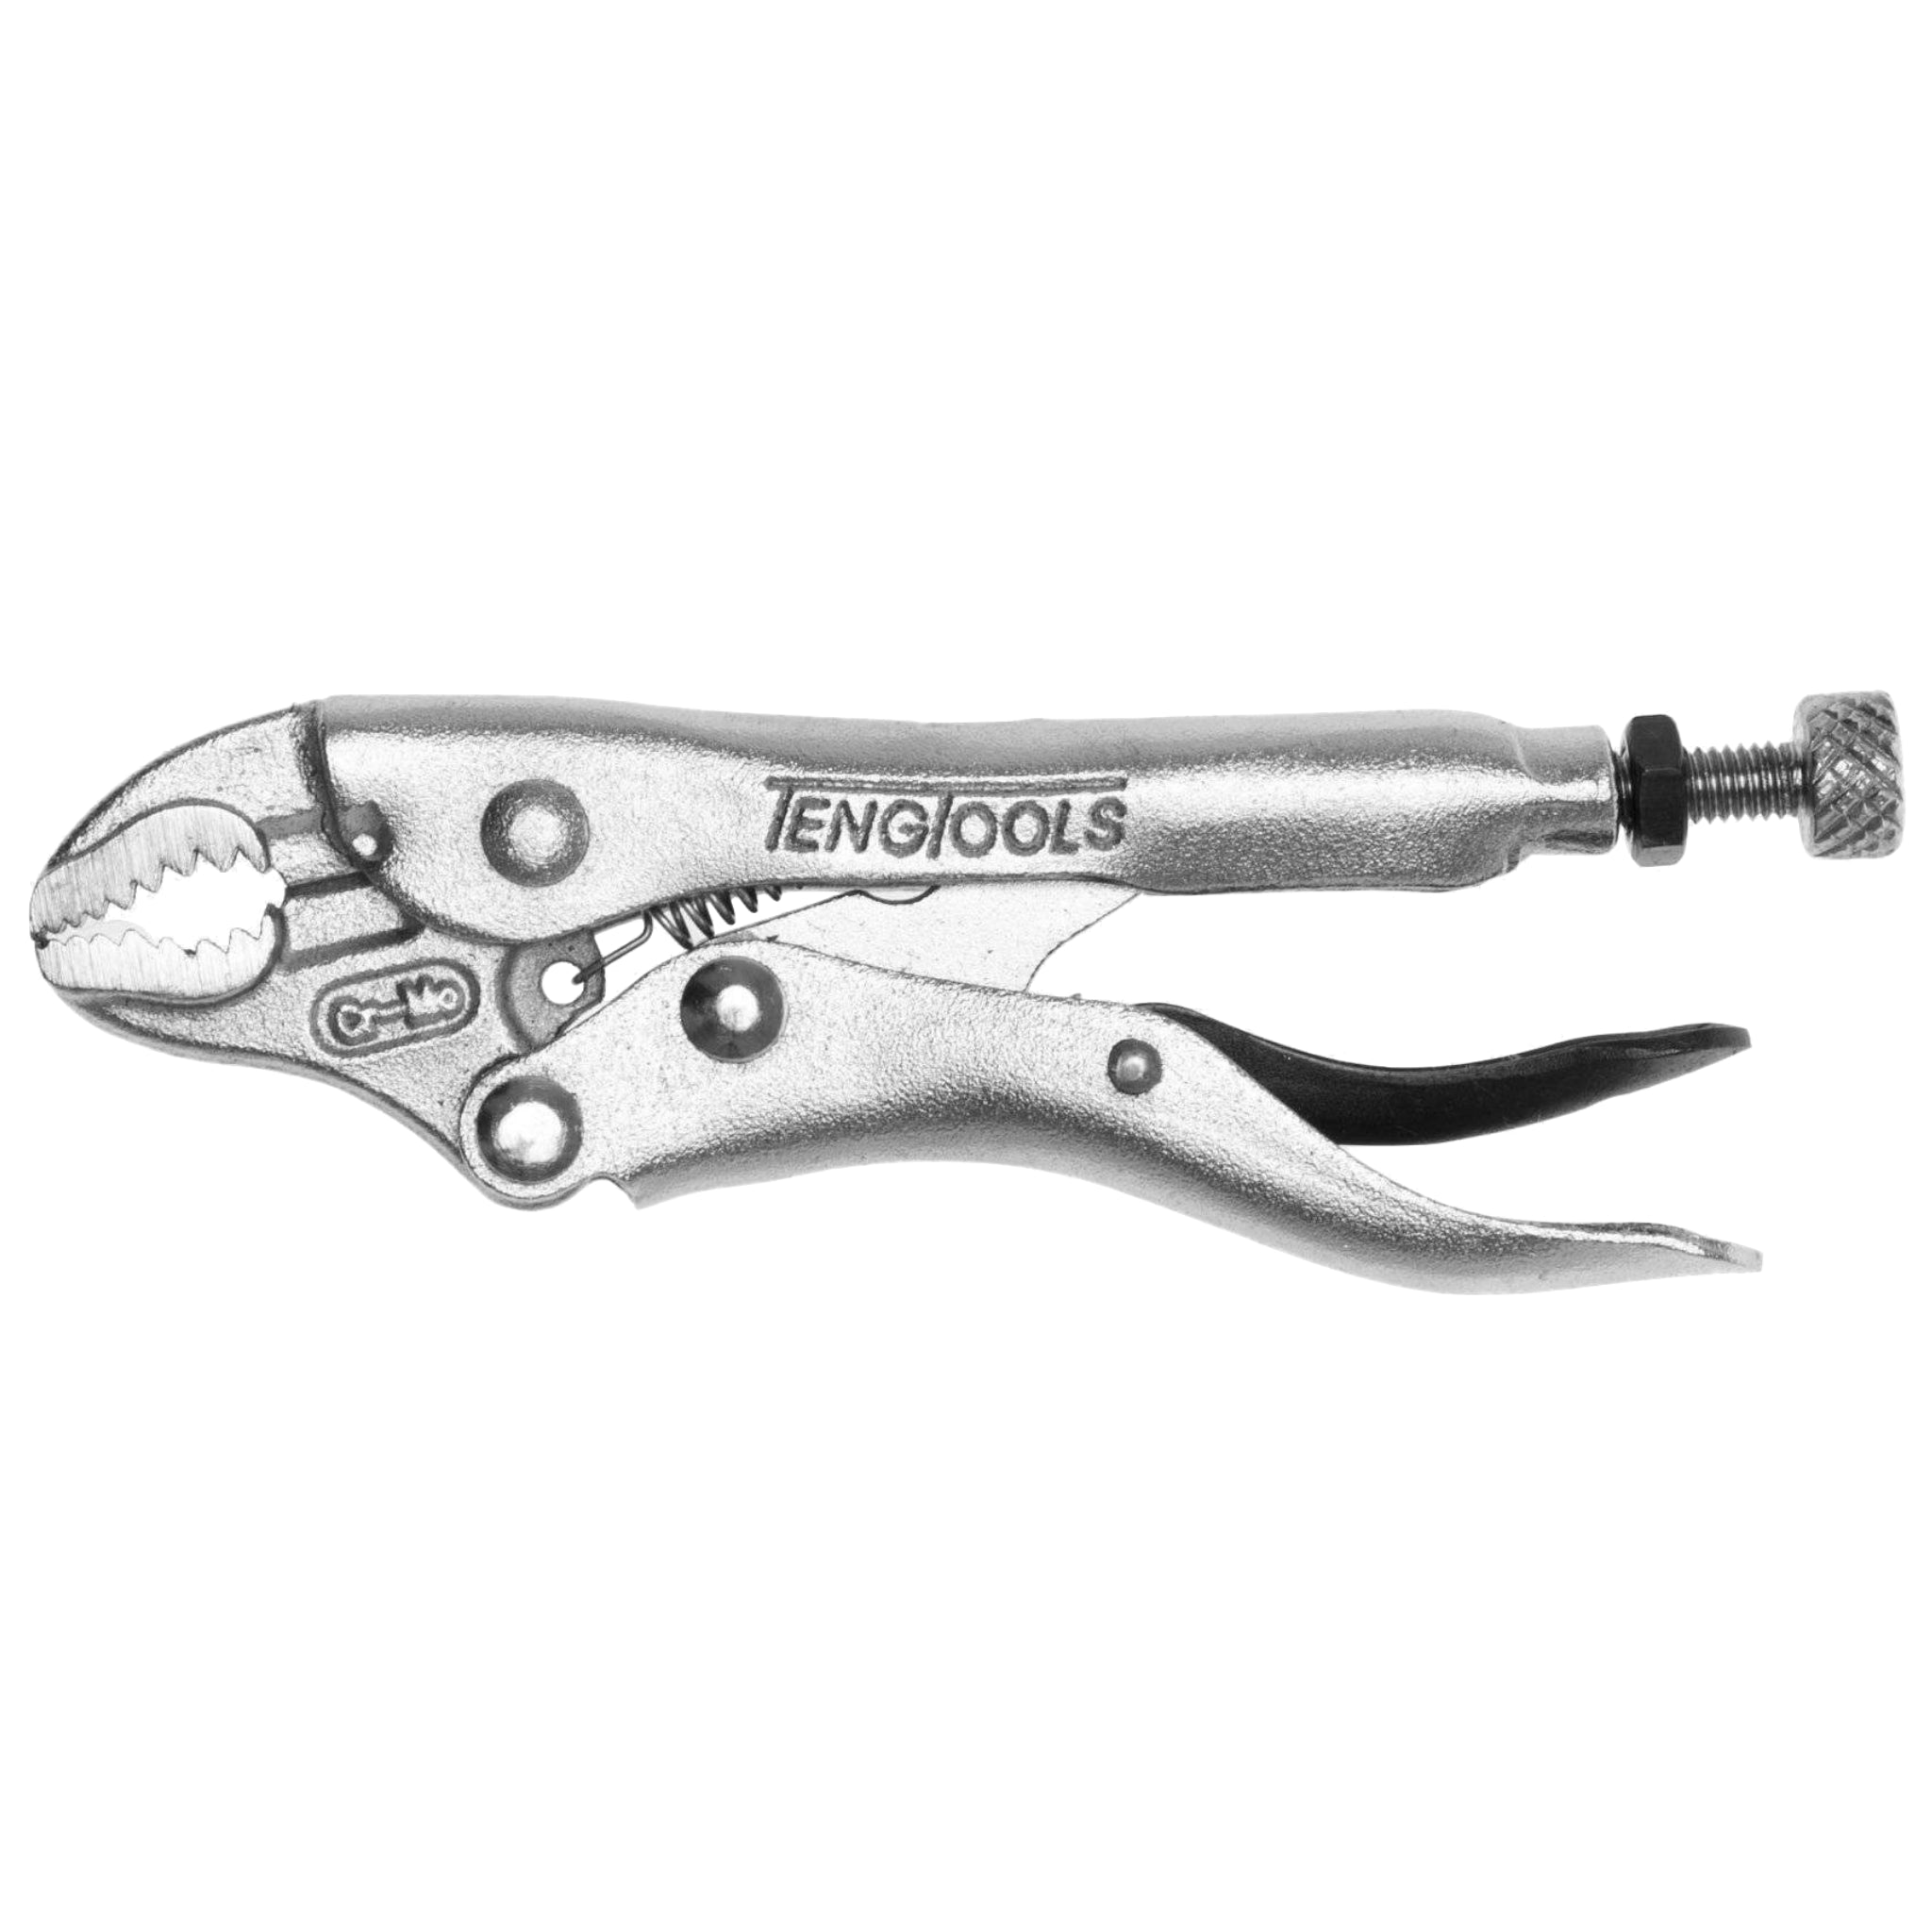 Teng Tools Locking Vise Grip Style Pliers With Curved Jaws - 4 Inch